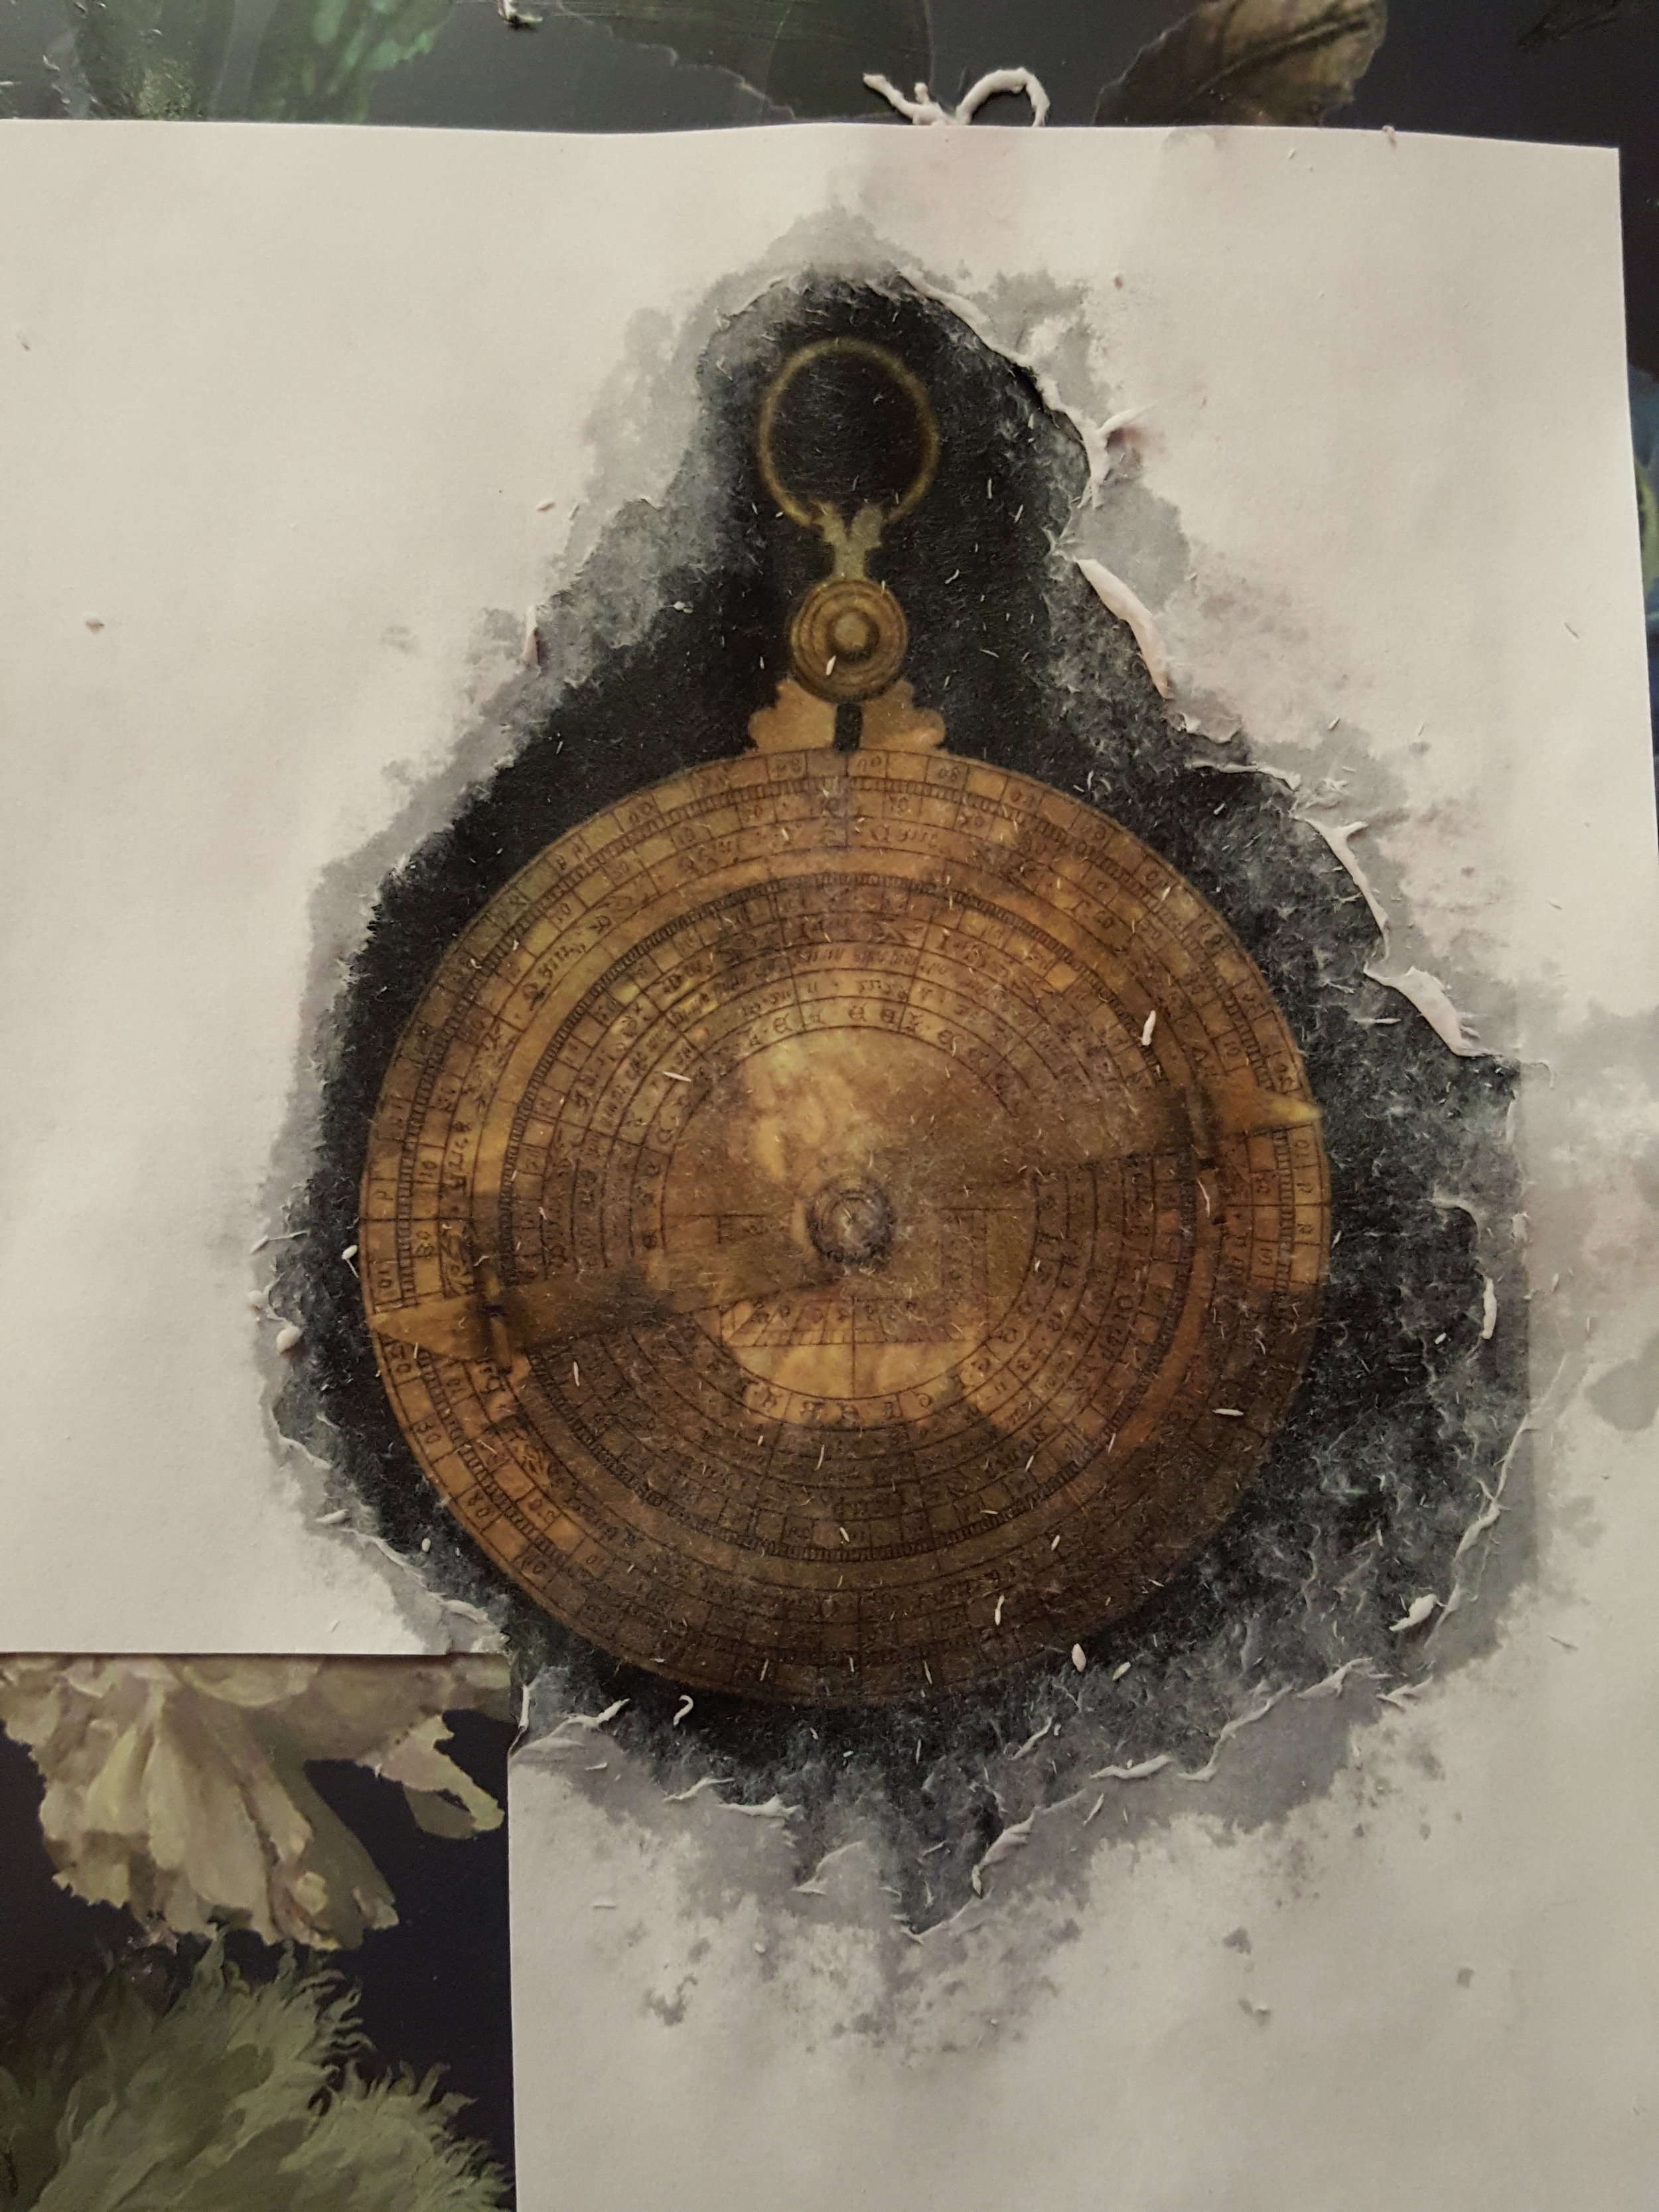  Creating an acrylic transfer of an antique astrolabe to gloss down onto a Fimo surface 